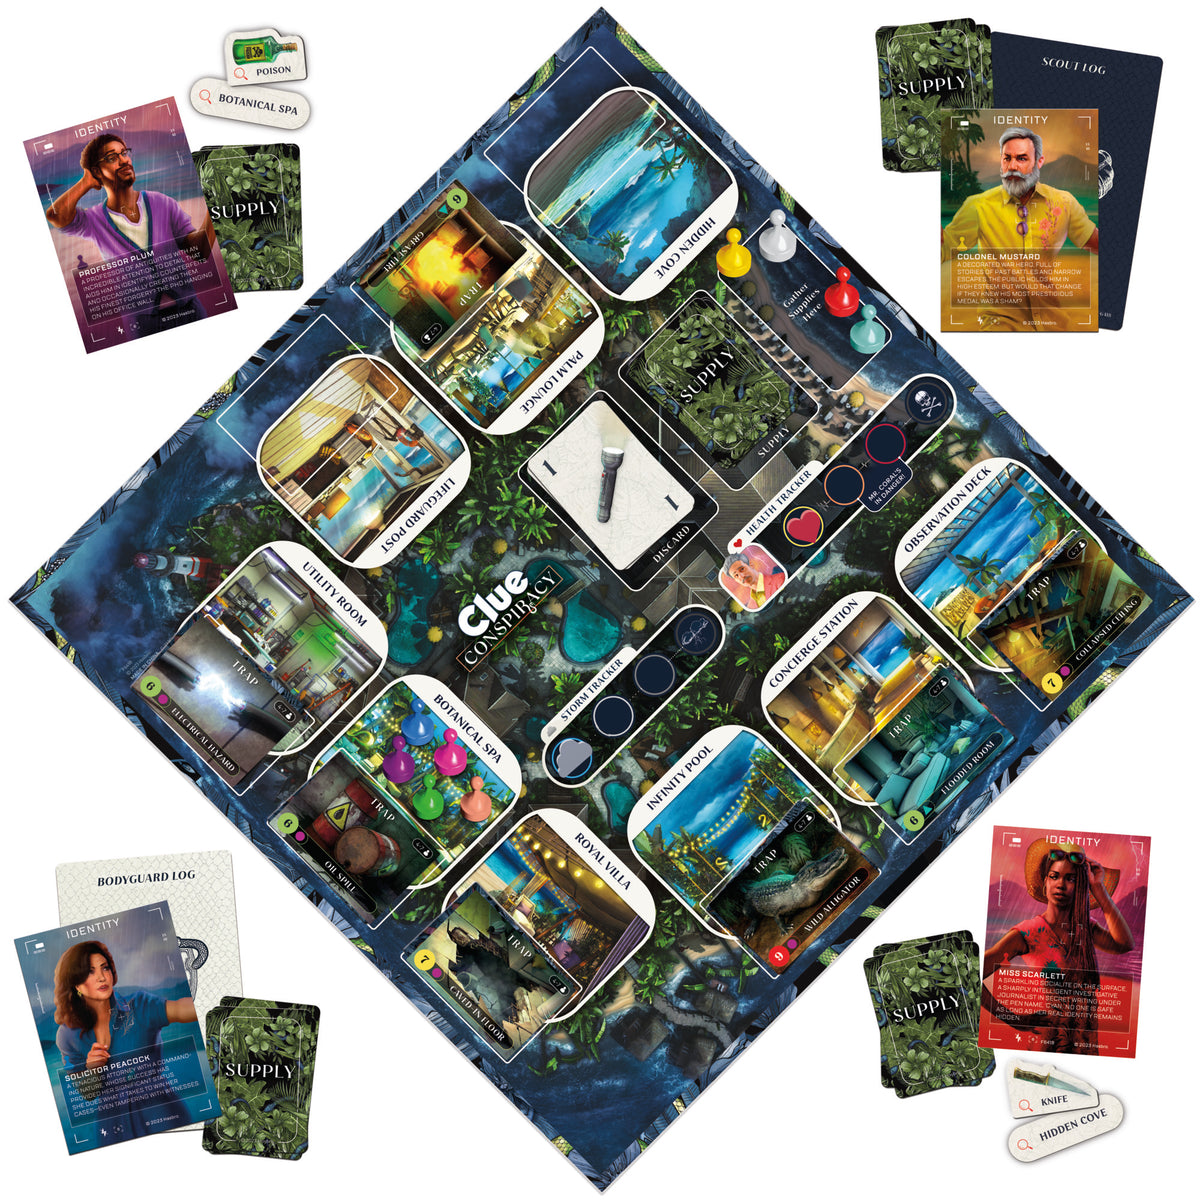 Cluedo Conspiracy twists the murder mystery formula with hidden identities  and an island resort vibe